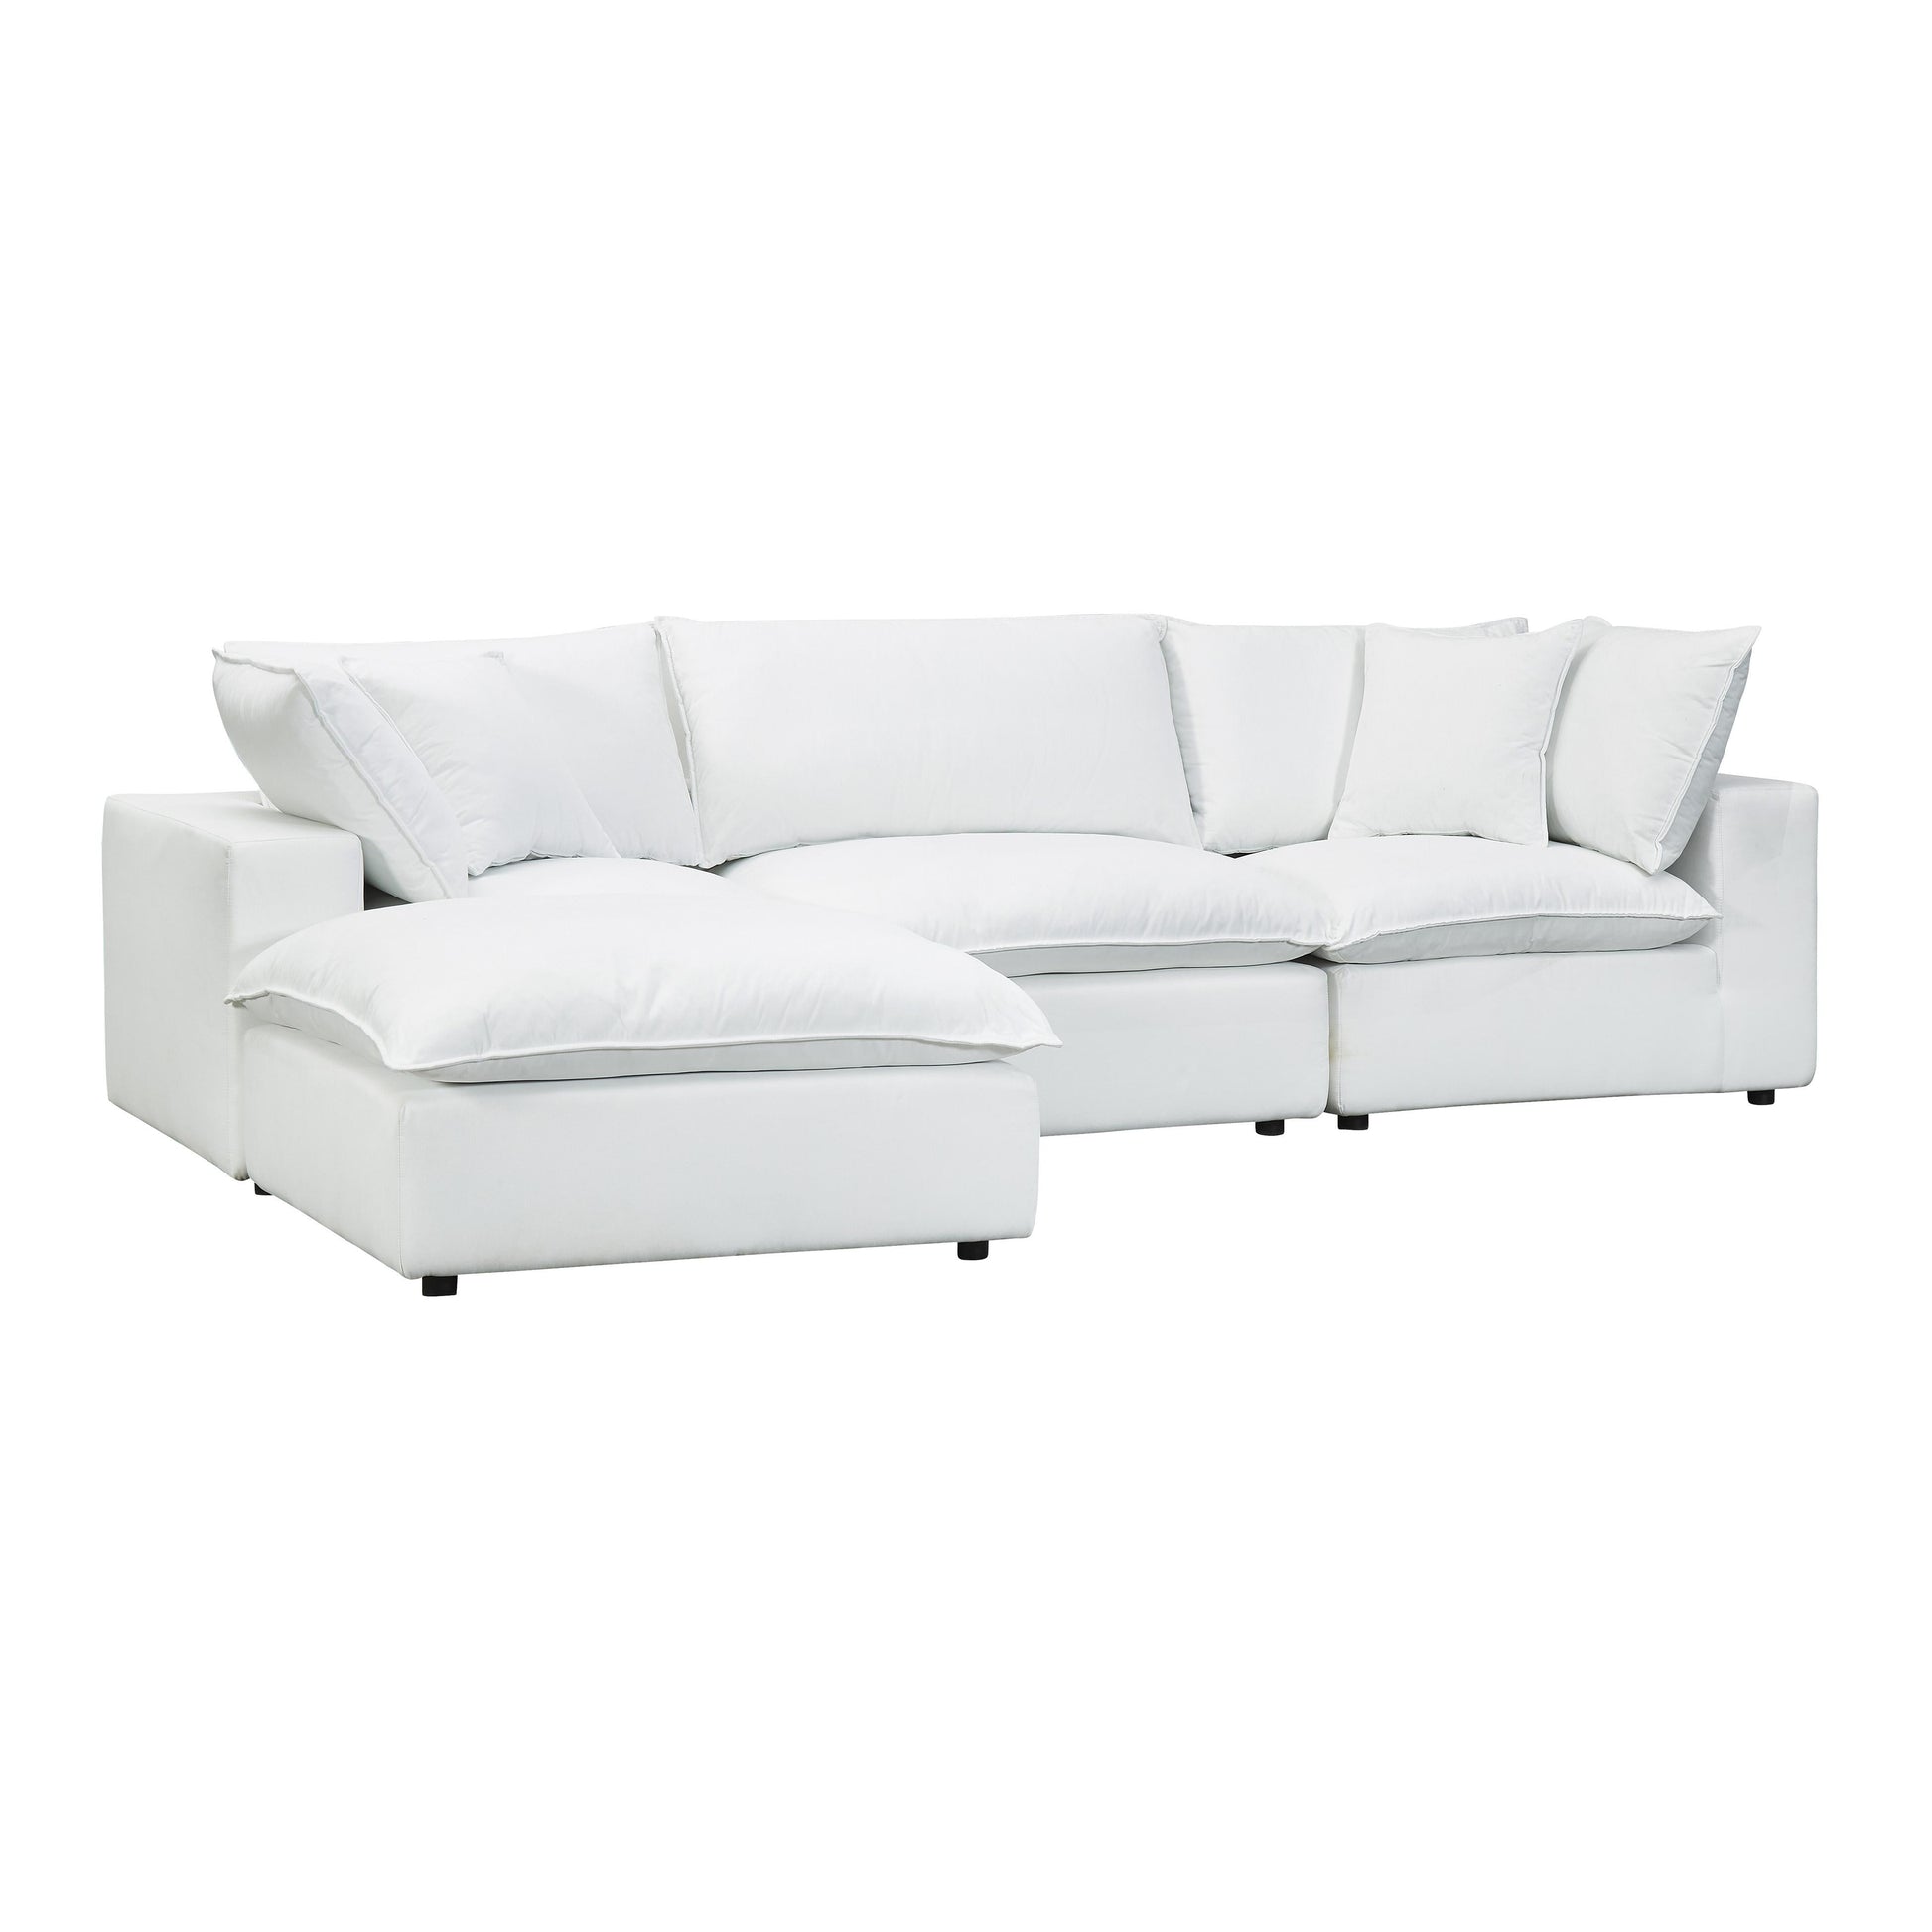 Cali Pearl Modular 4 Piece Sectional by TOV